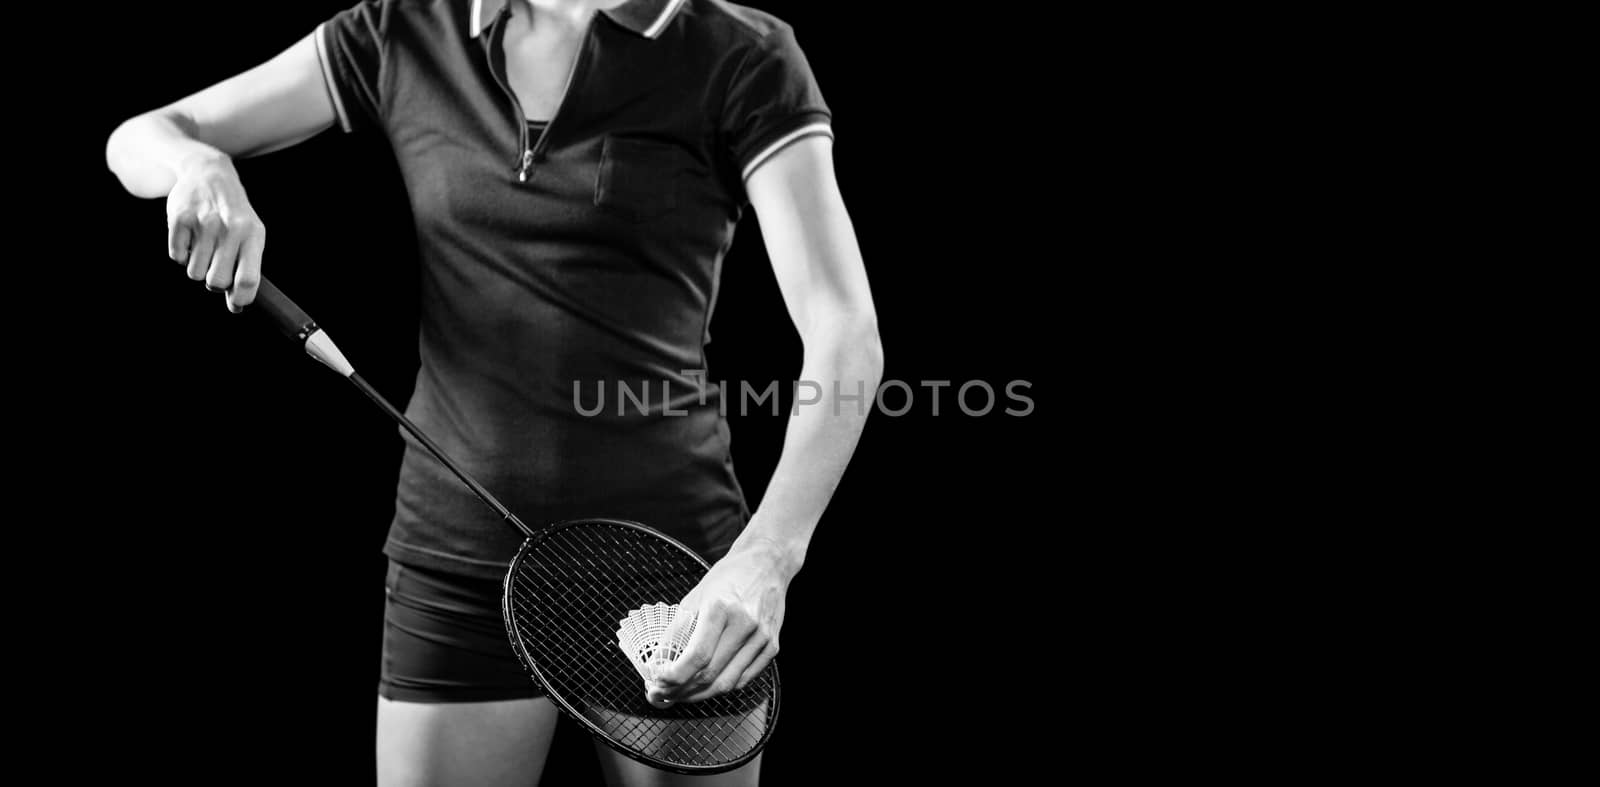 Badminton player holding a racquet ready to serve  by Wavebreakmedia